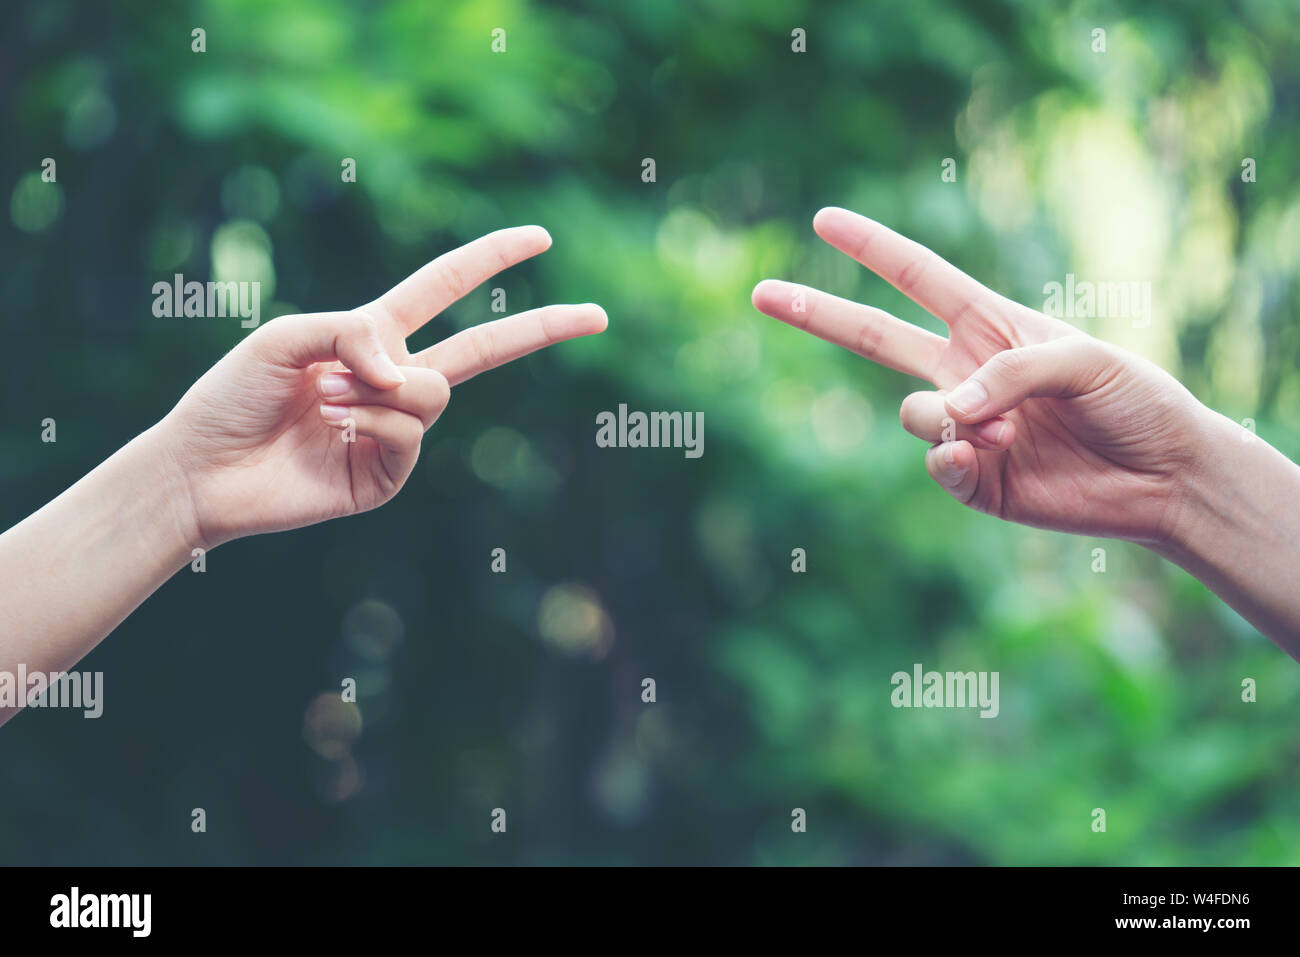 Couple play rock paper scissors hand game nature green background Stock Photo